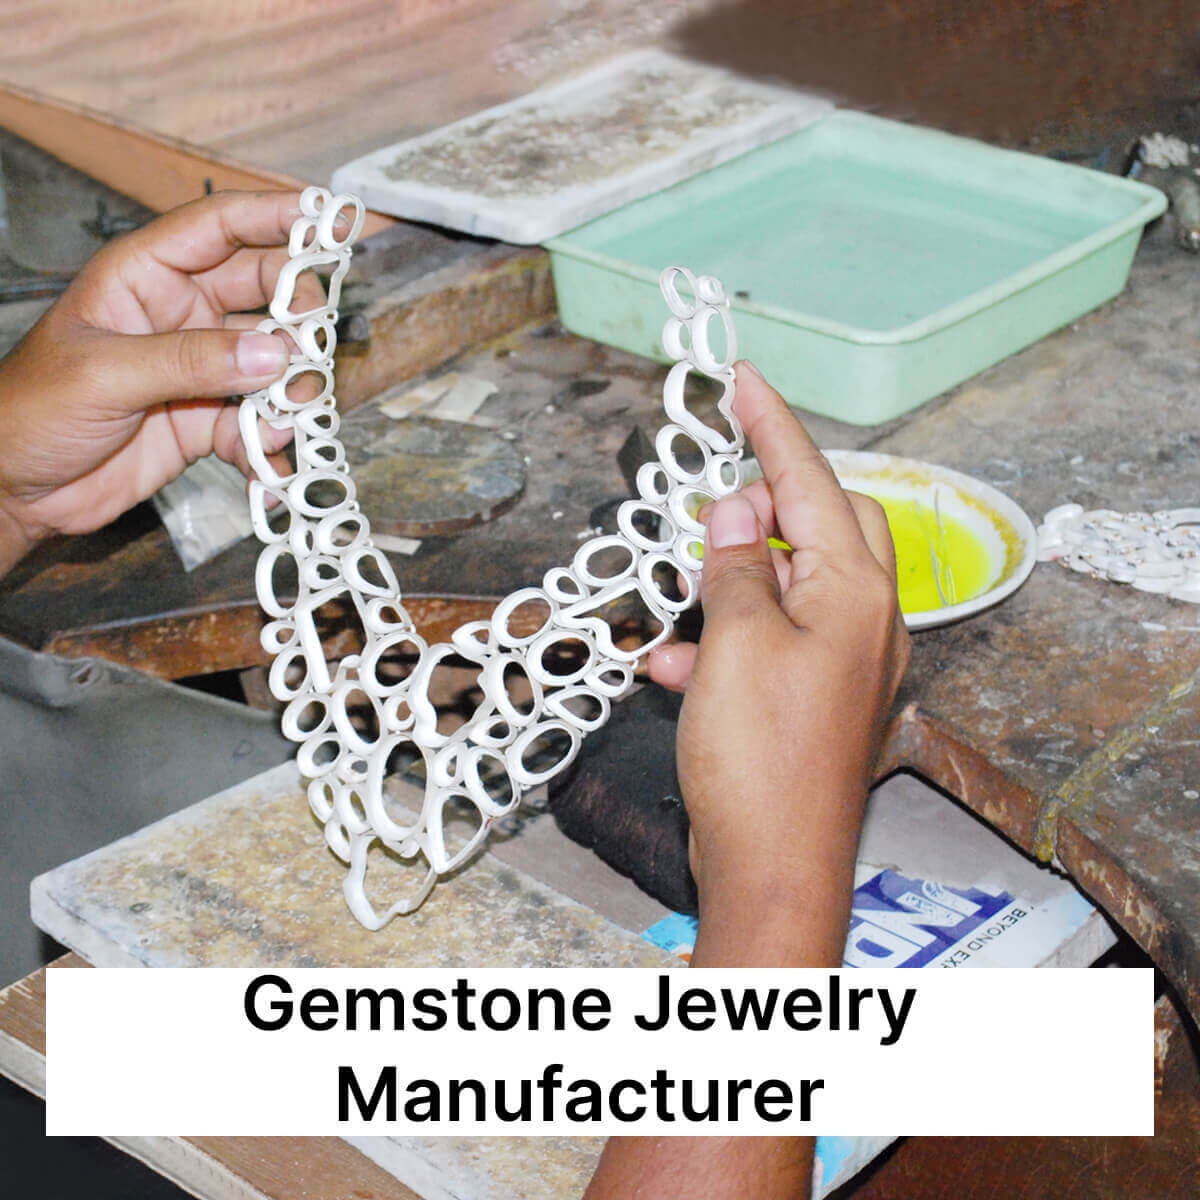 Reliable Gemstone Jewelry Manufacturing Company